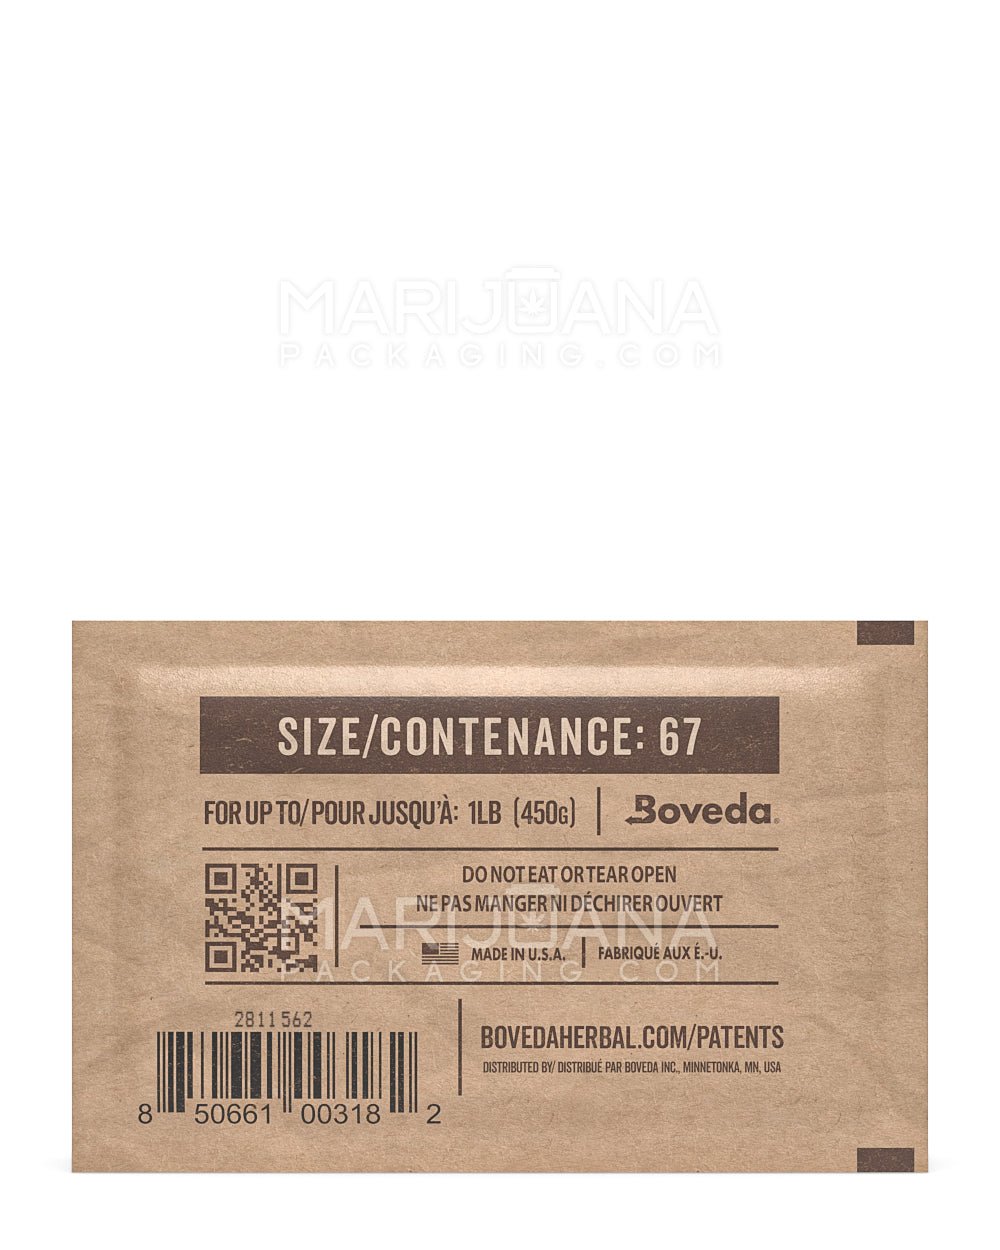 BOVEDA | Humidity Control Packs | 67 Grams - 62% - 100 Count - 3